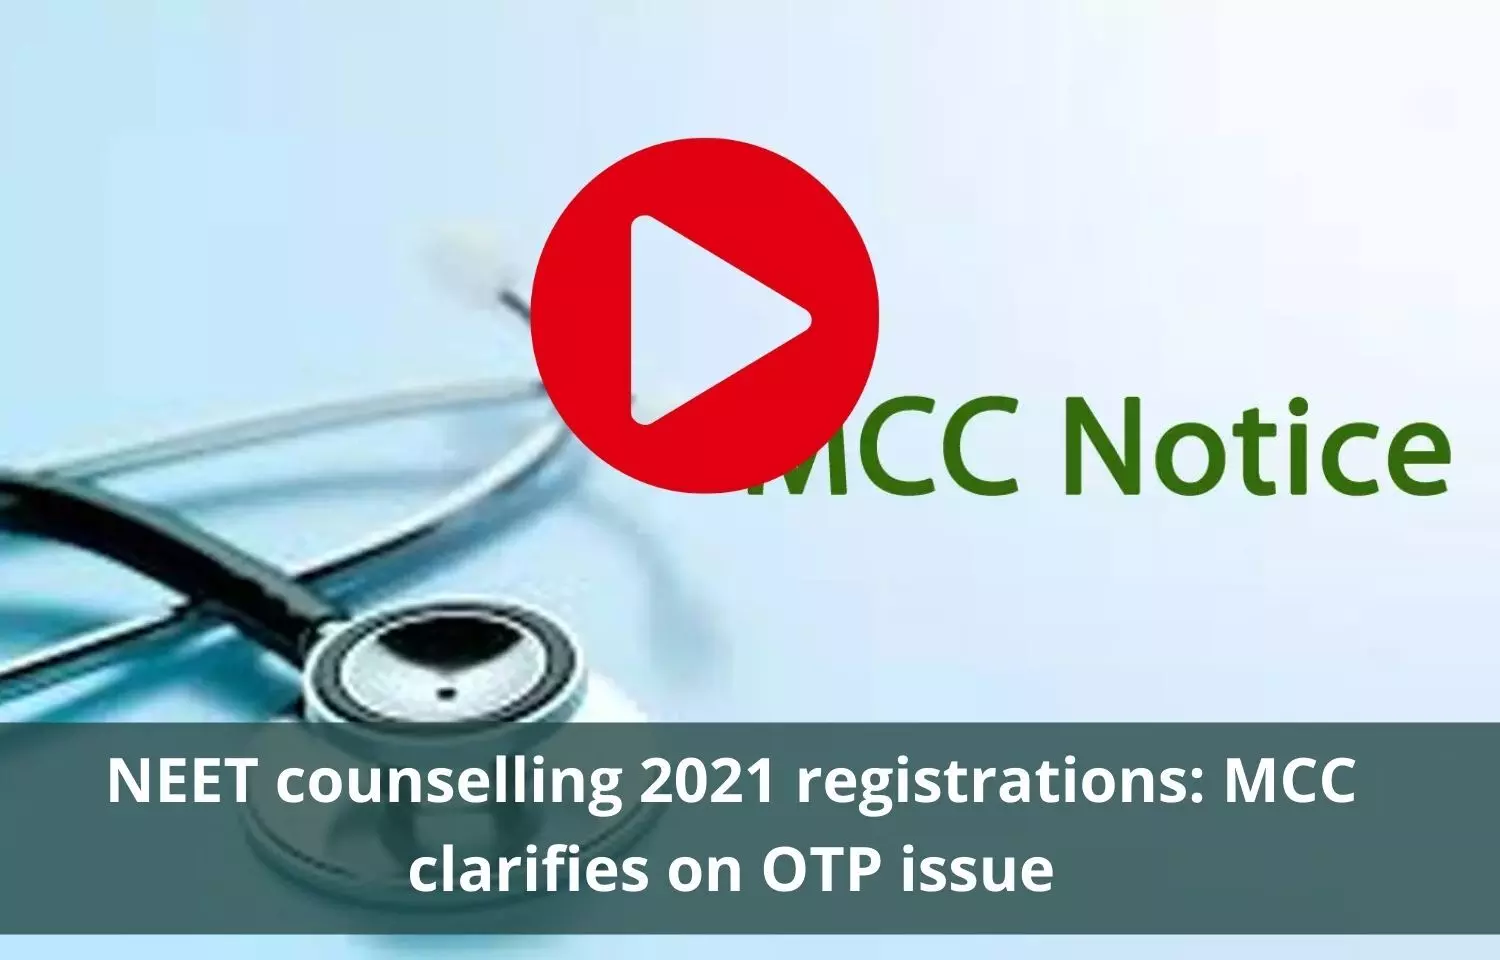 MCC issues clarification on OTP issue faced by NEET 2021 candidates